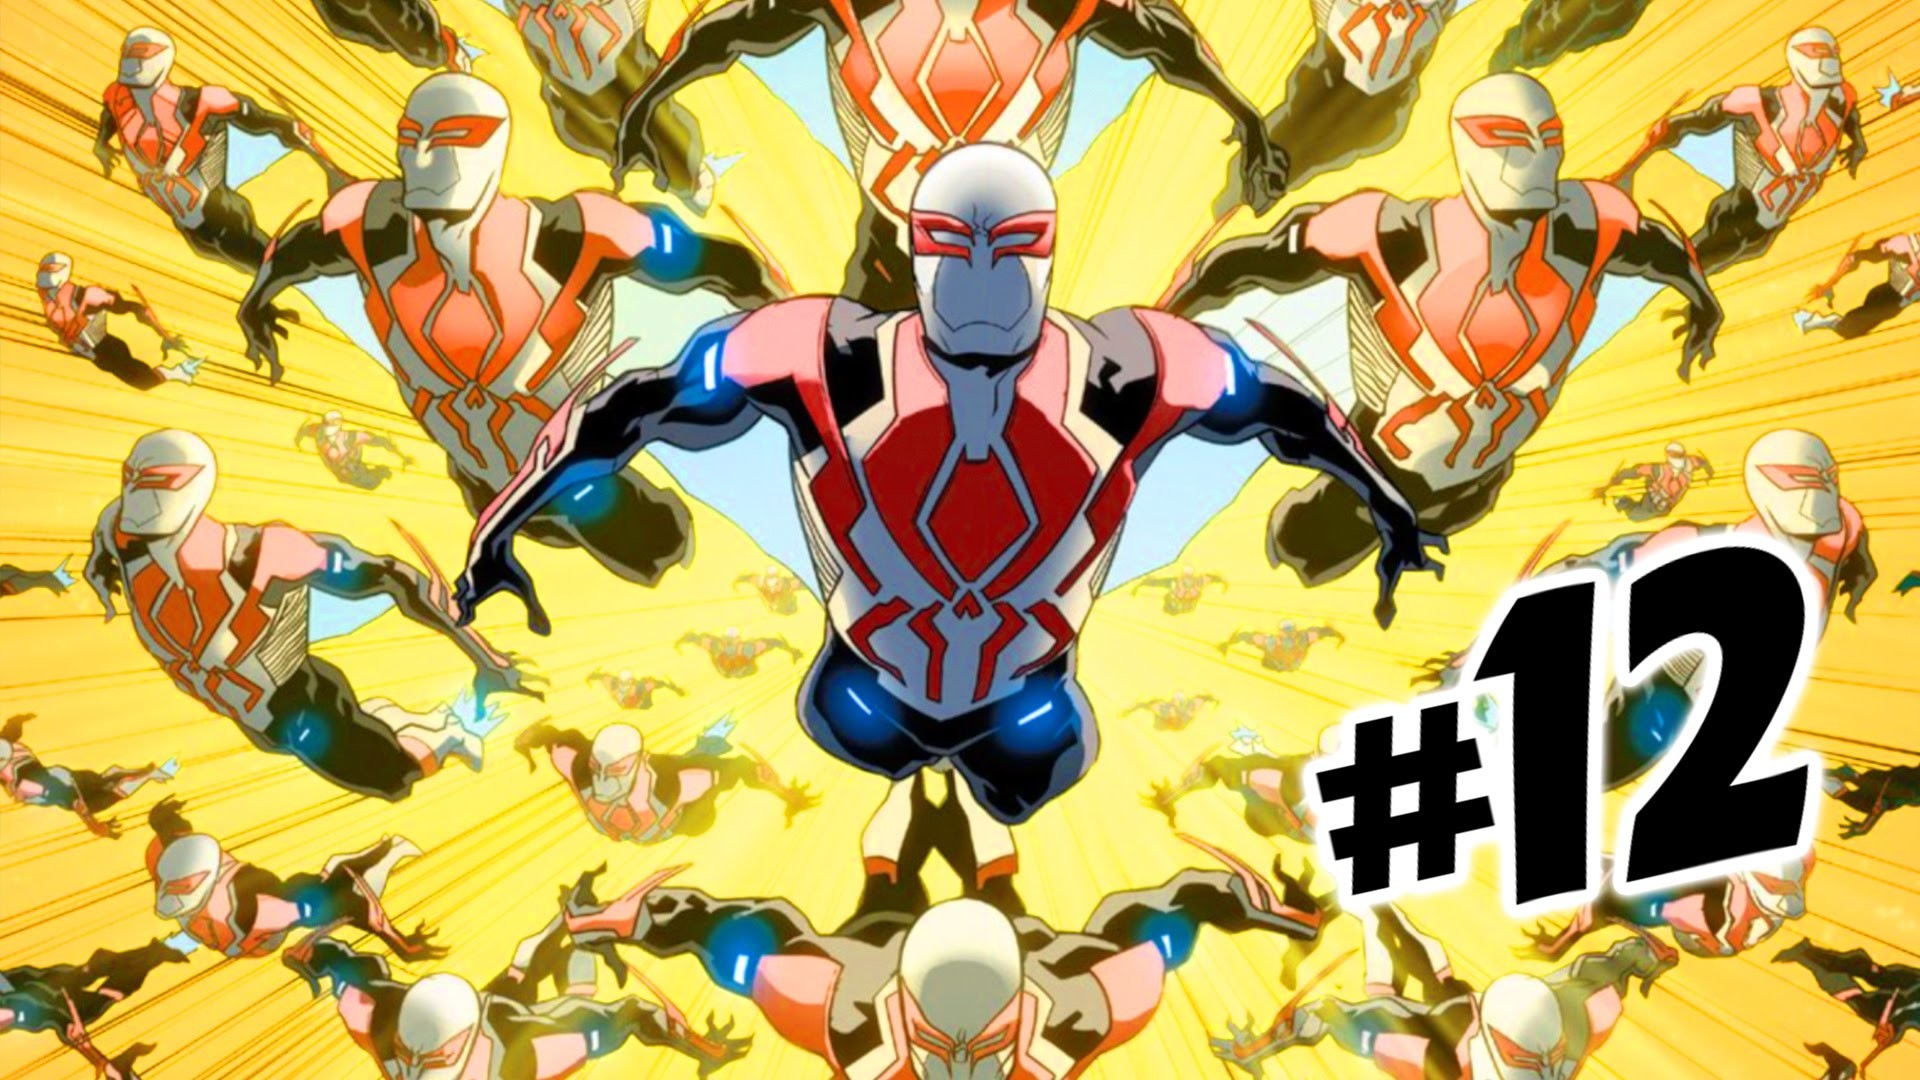 Spider-Man 2099 (All-New All-Different) Issue #12 Full Comic Review! (2016)  – YouTube